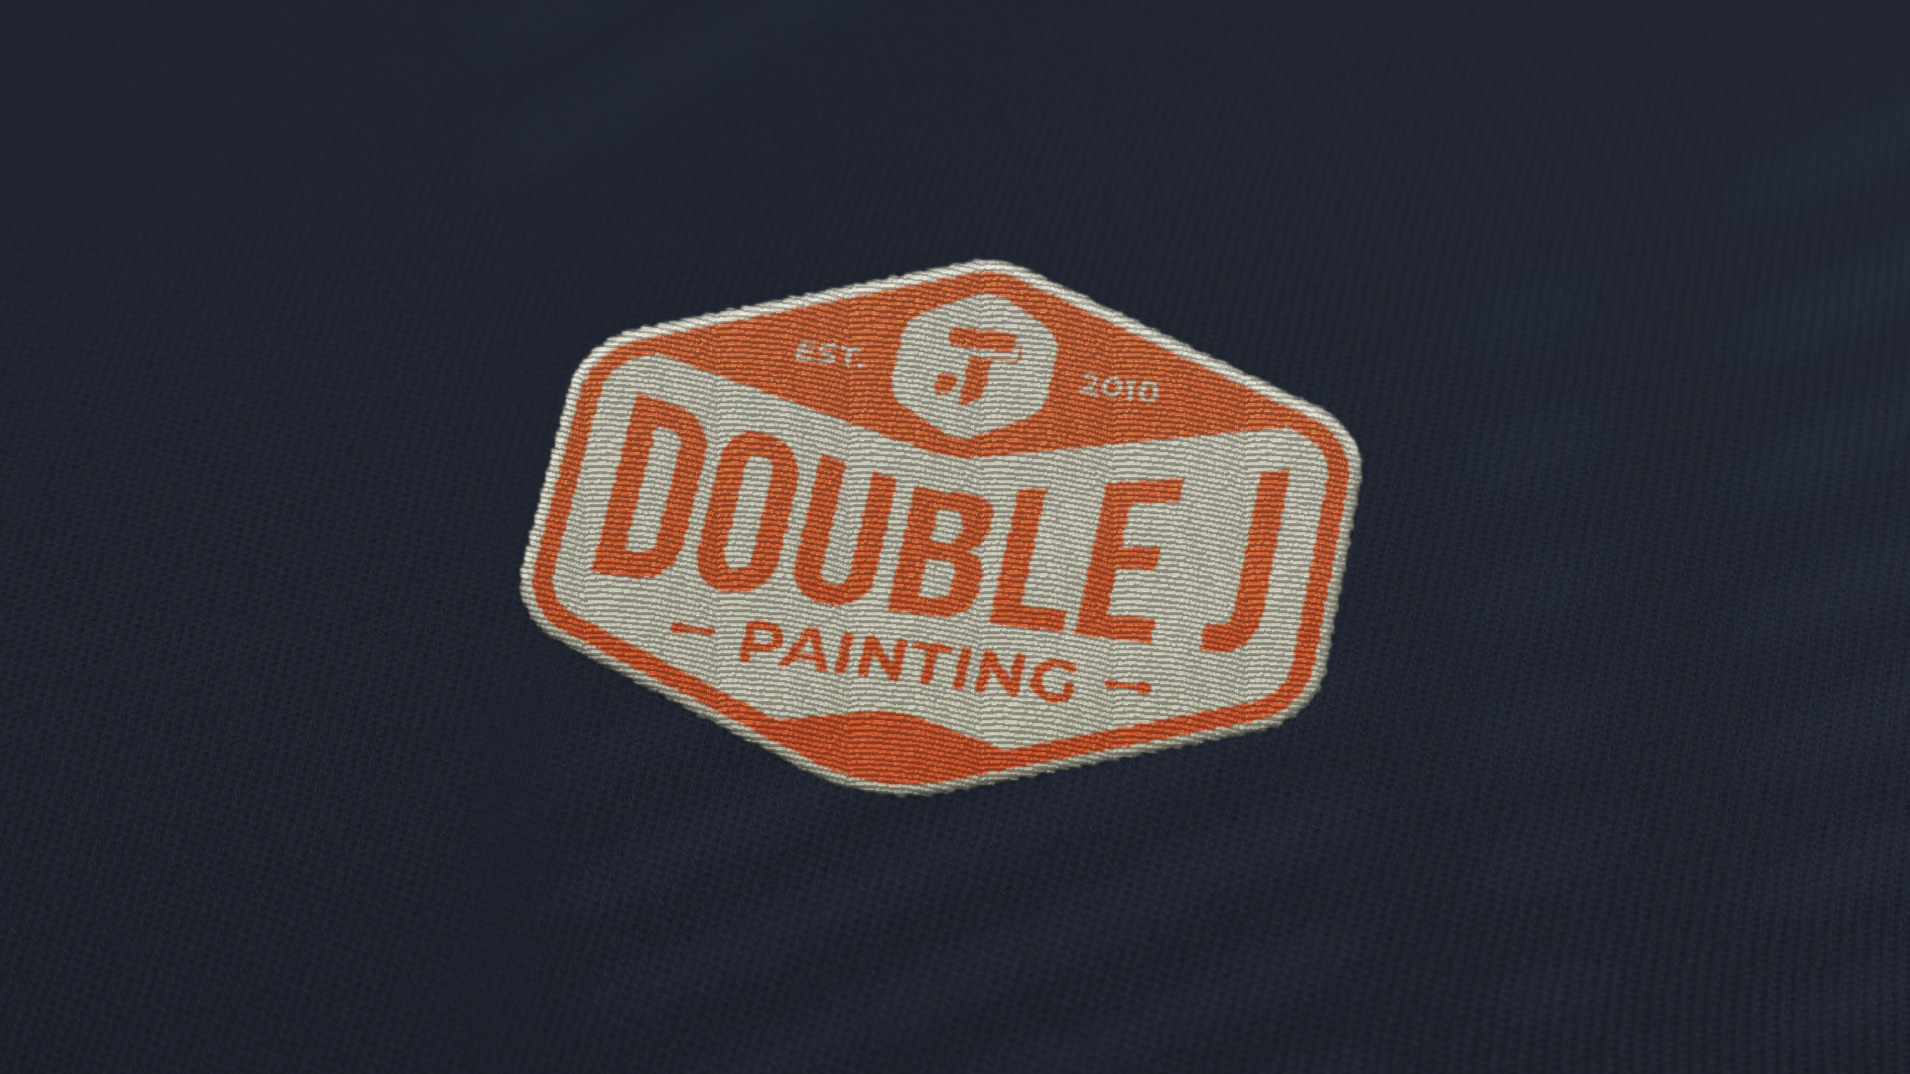 Double J Painting